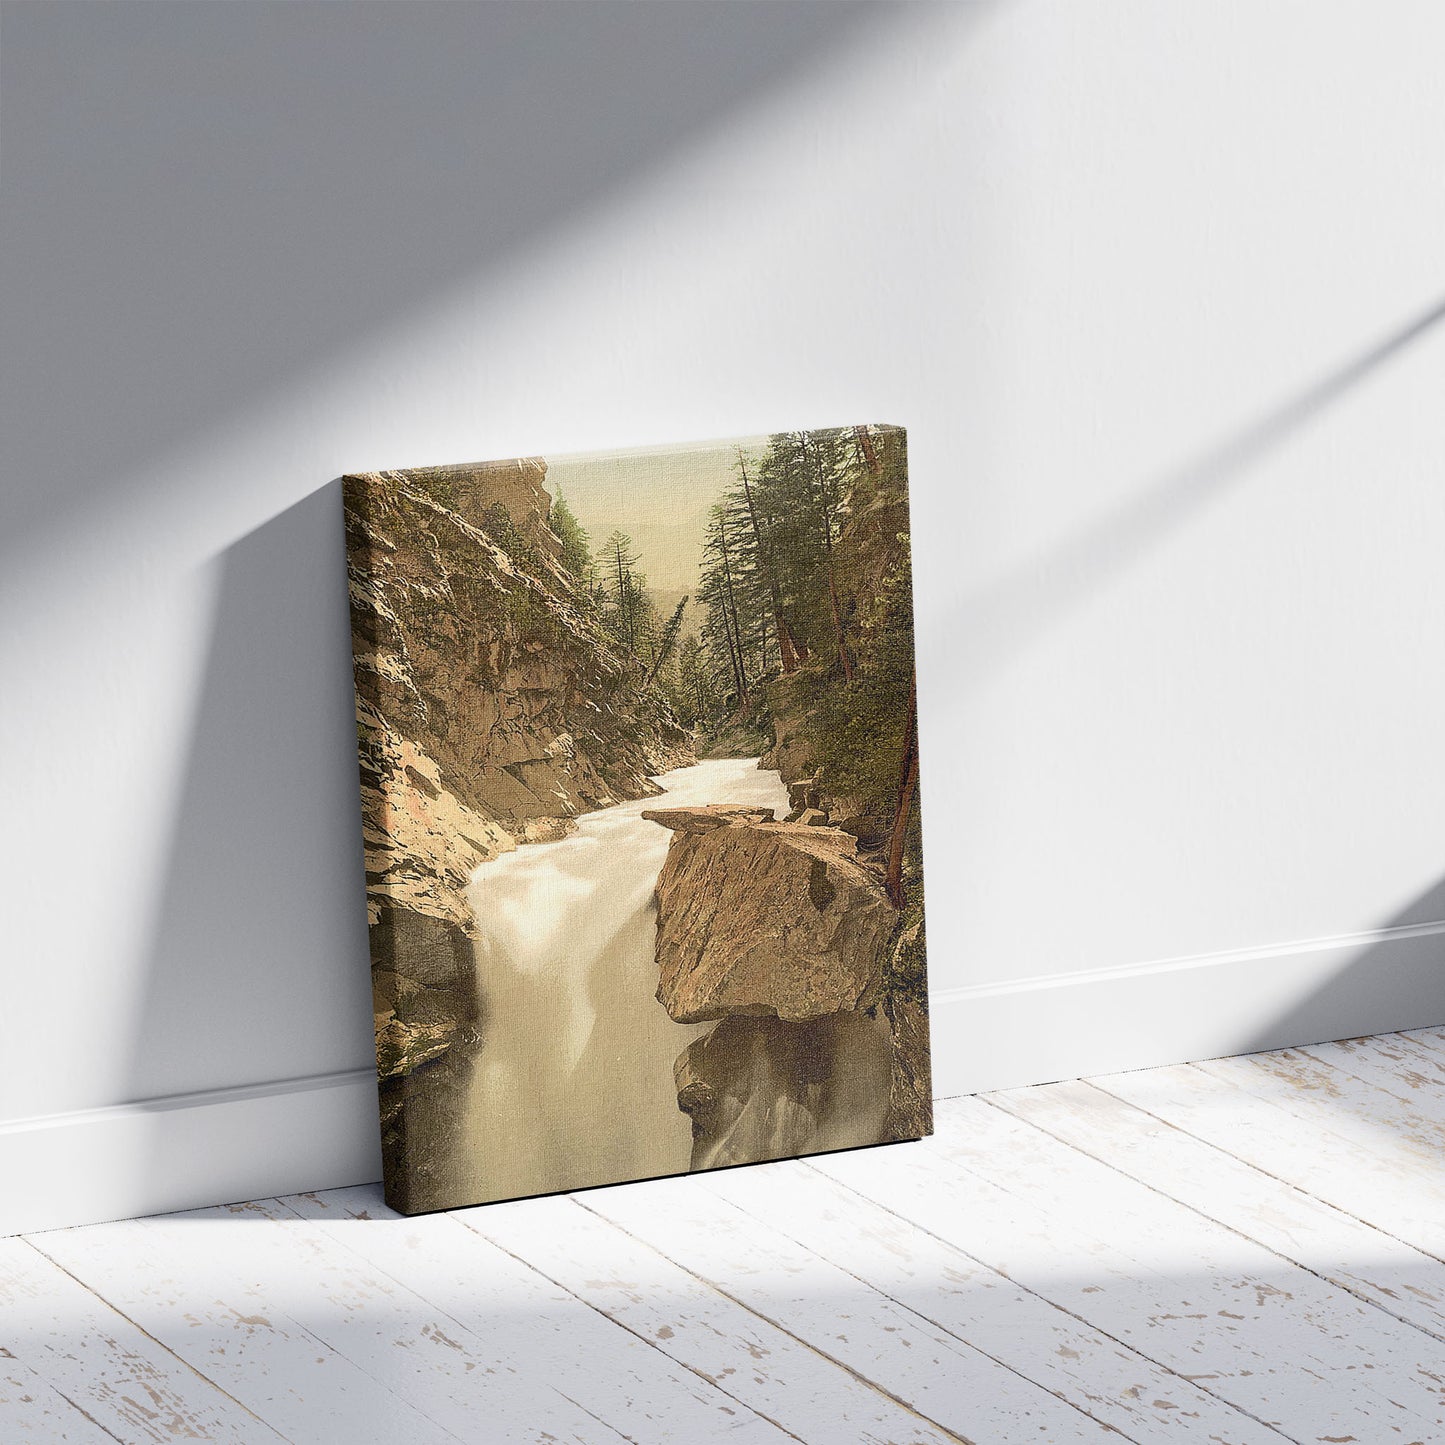 A picture of Zermatt, Gorner Gorge, Valais Alps of, Switzerland, a mockup of the print leaning against a wall